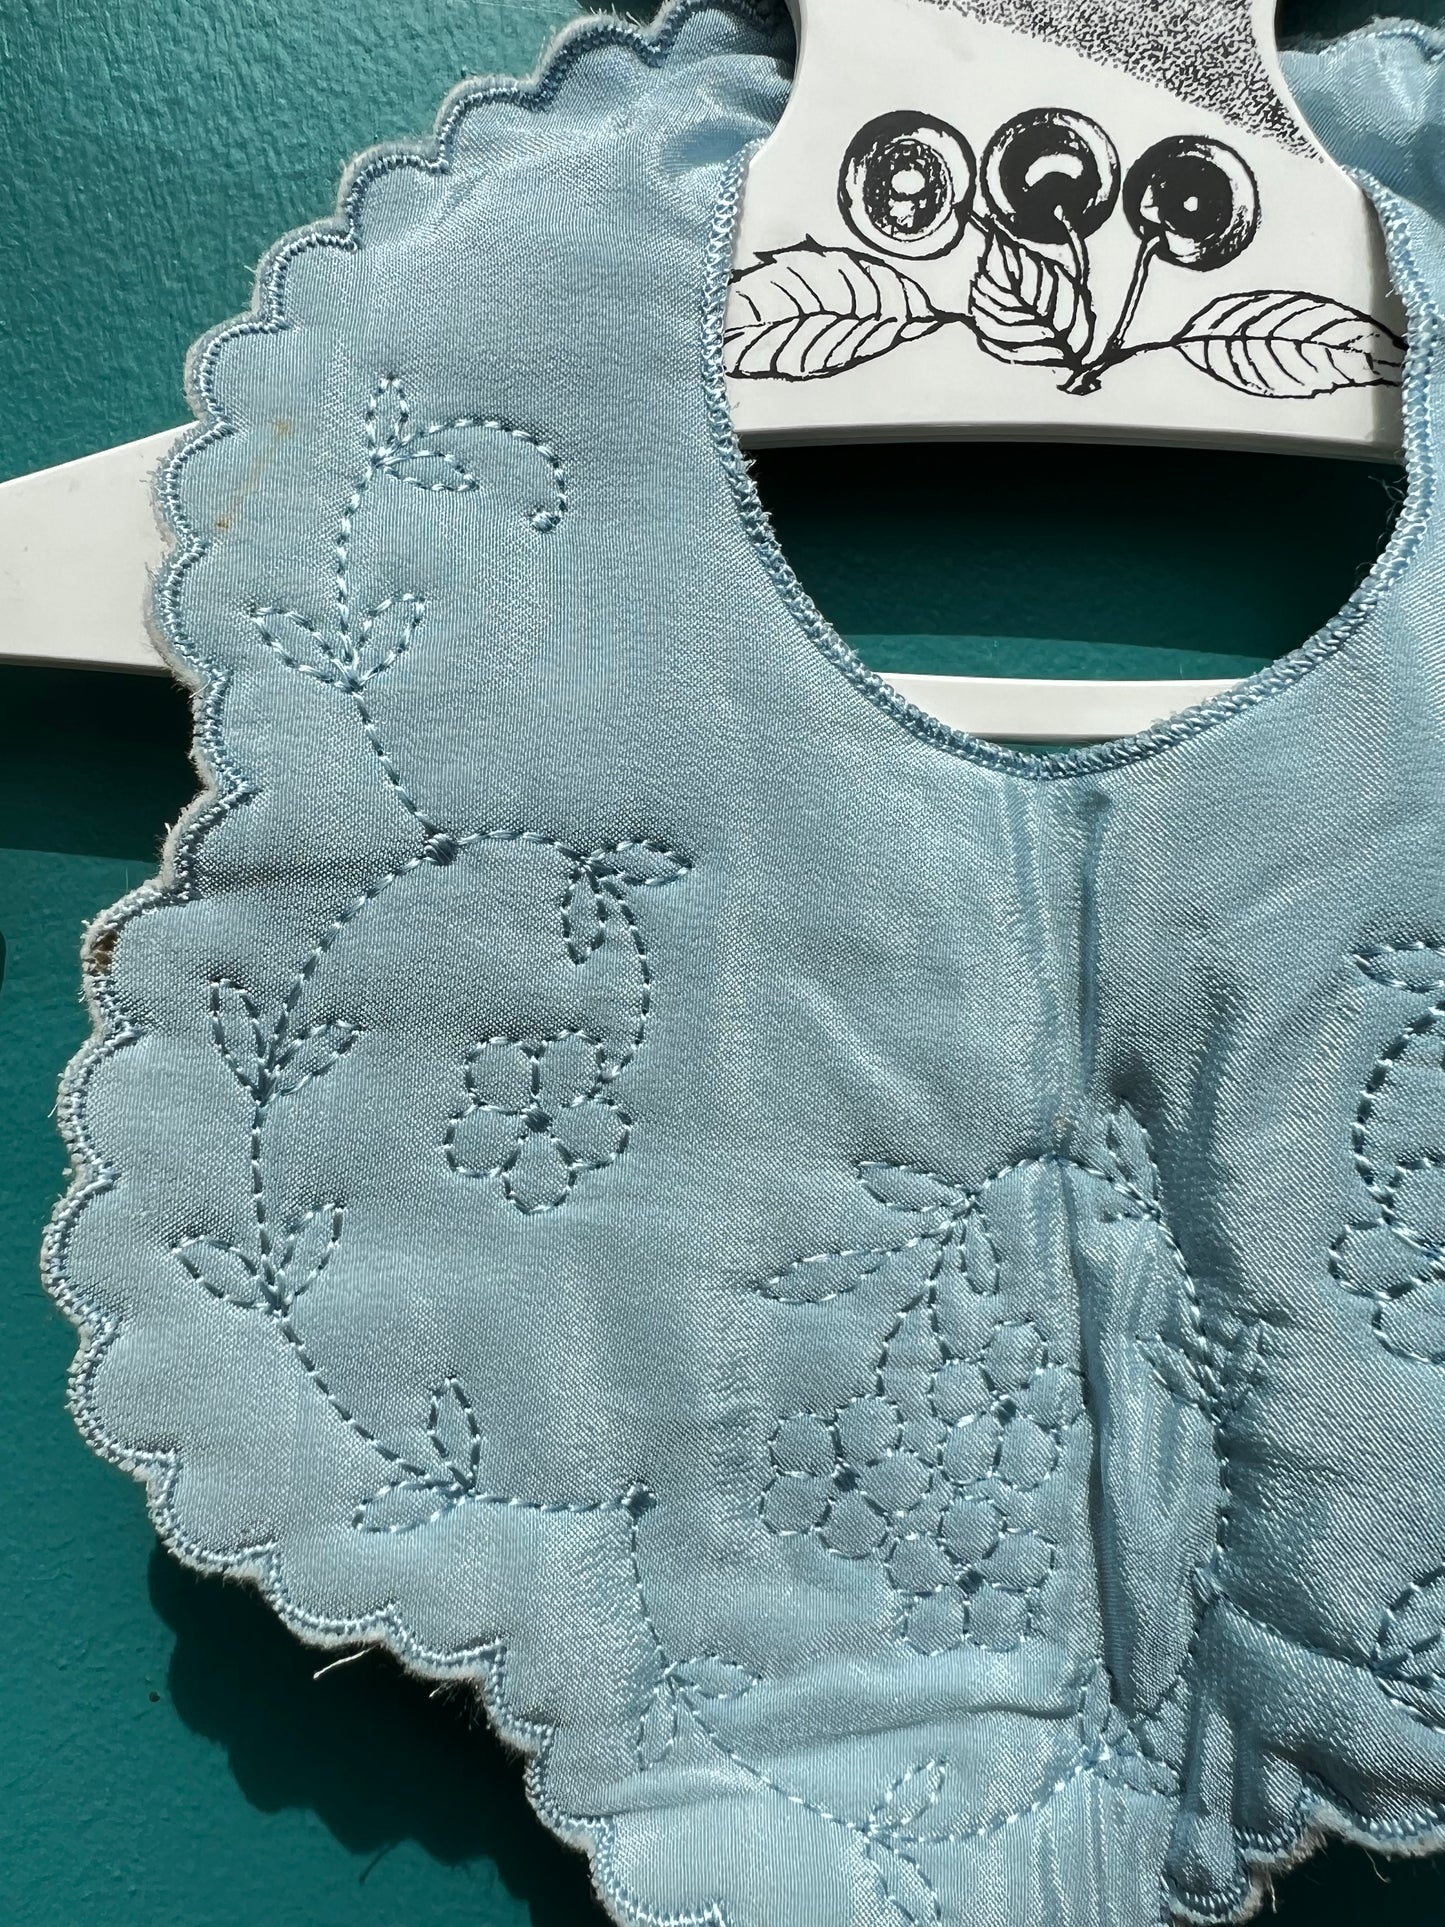 Somewhat Impractical 1940/50s Embroidered Bib